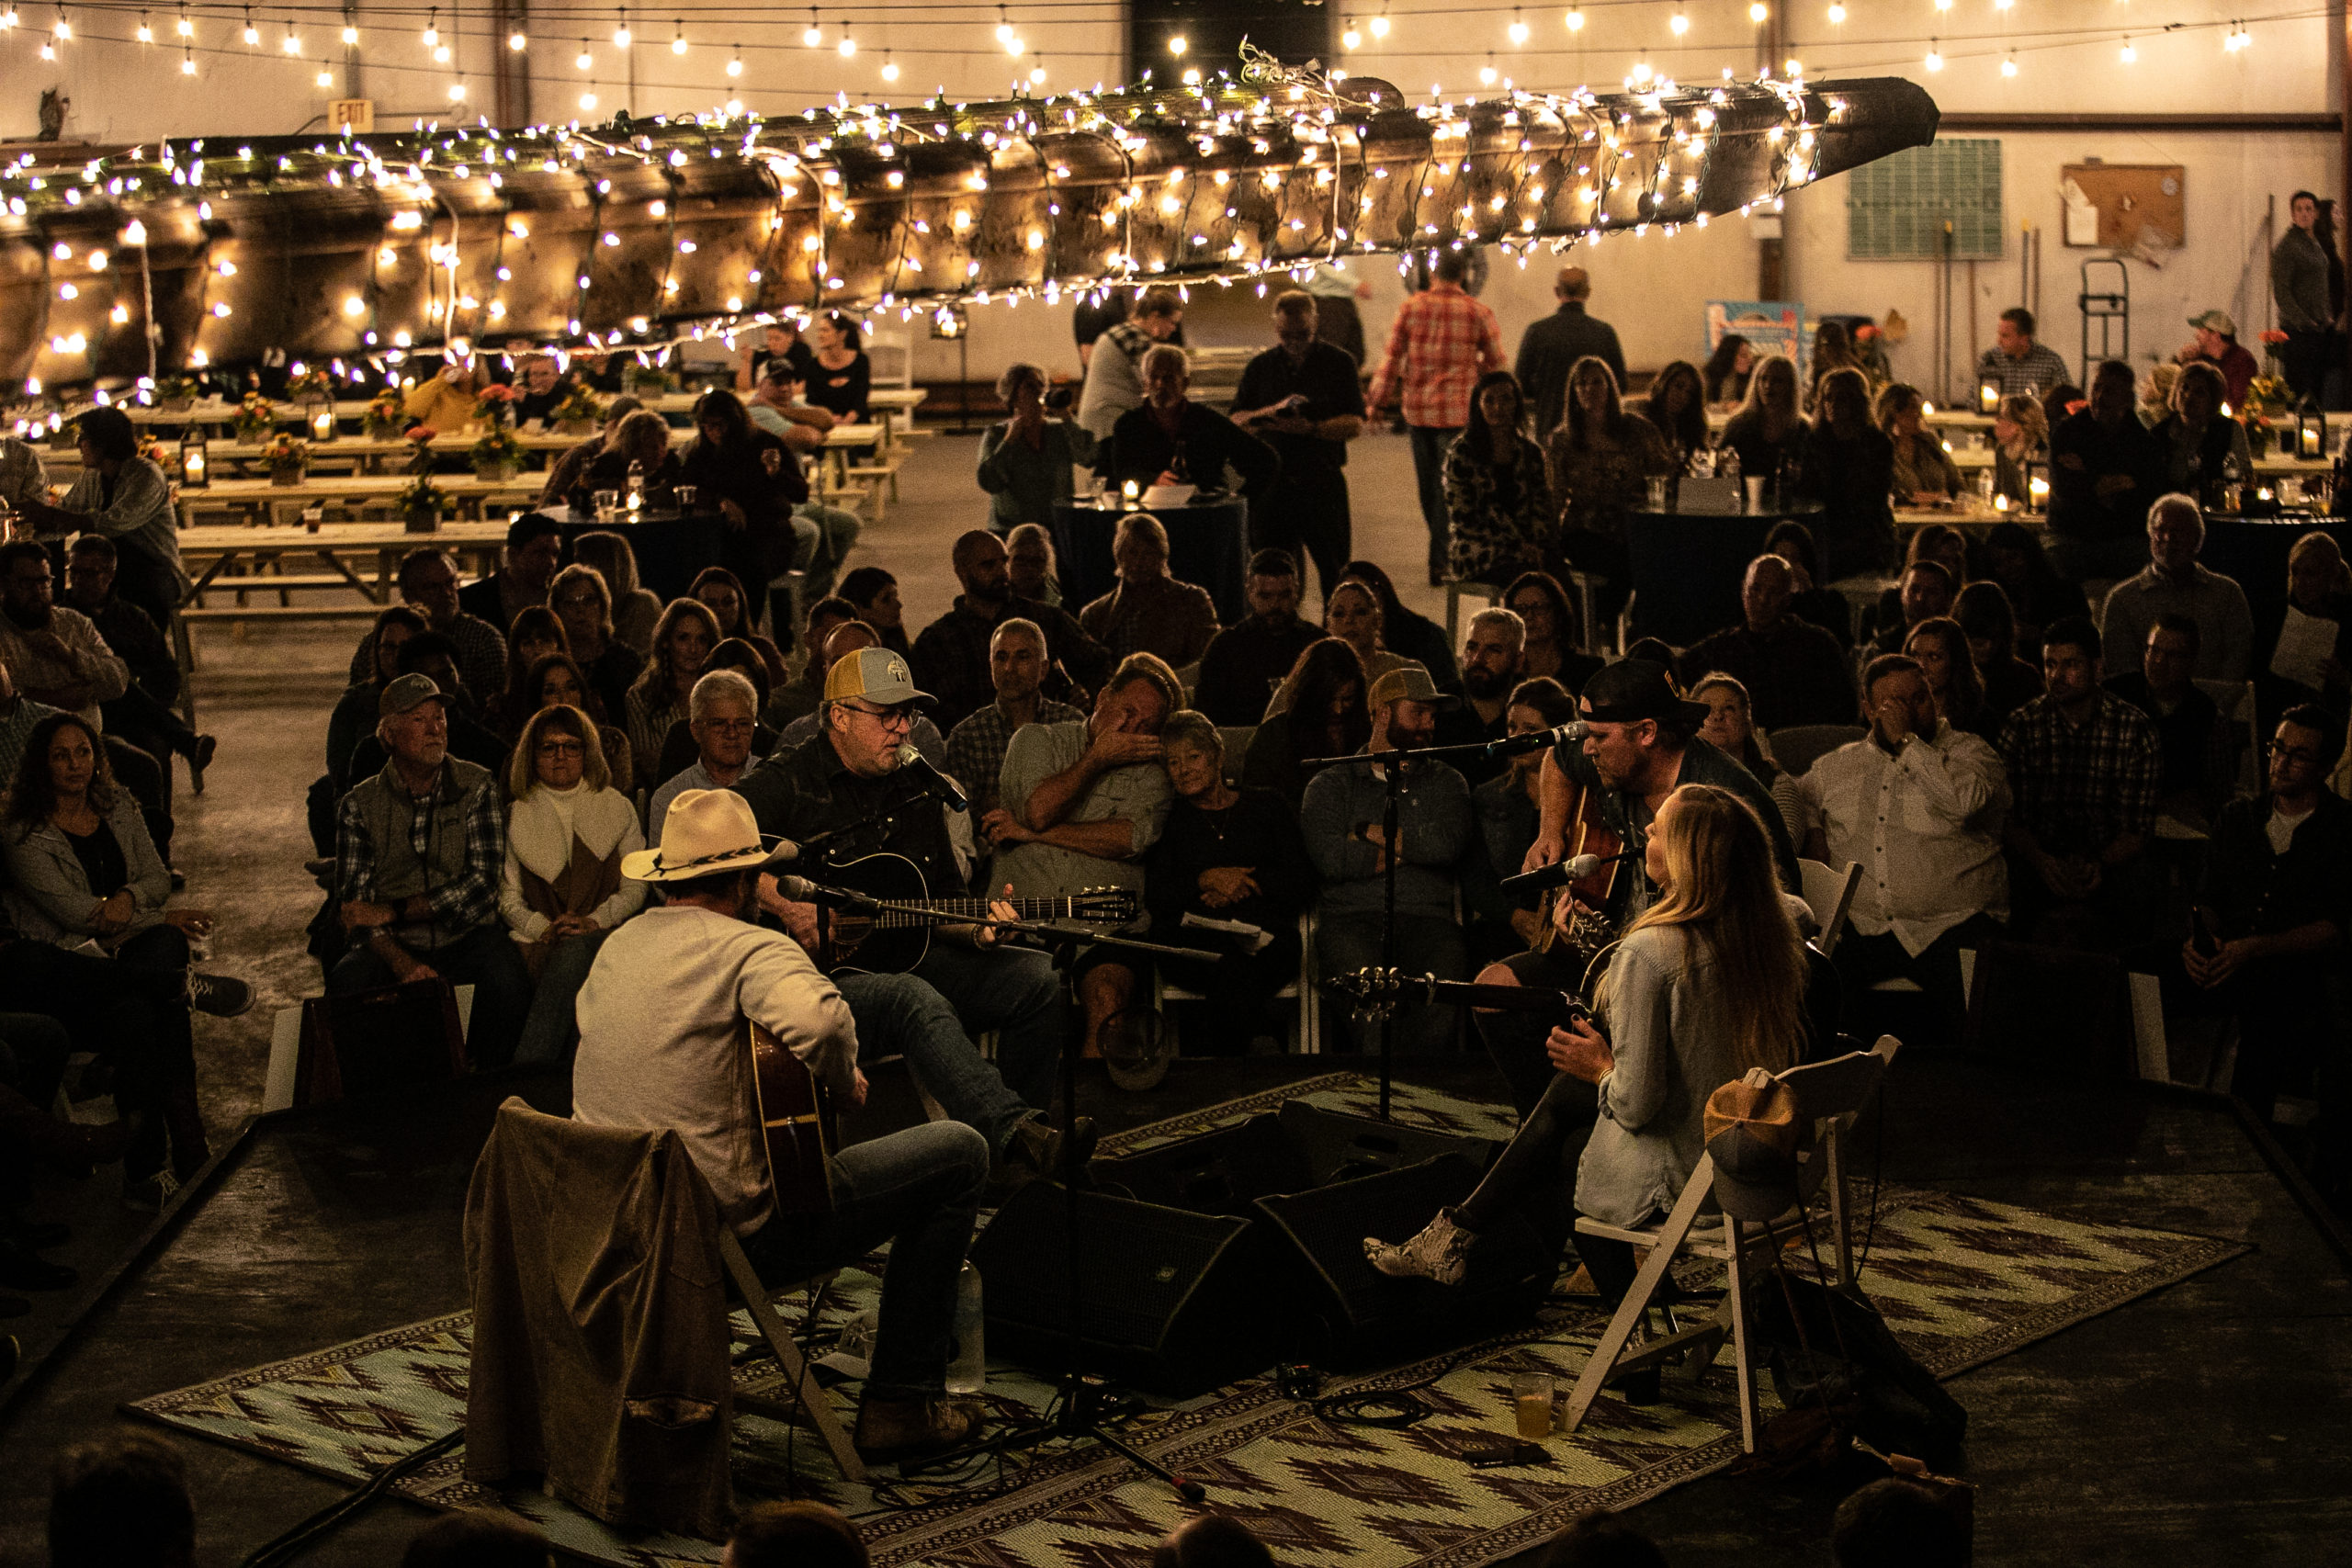 An intimate live Songwriters' Round with an engaged audience under the warm glow of string lights.